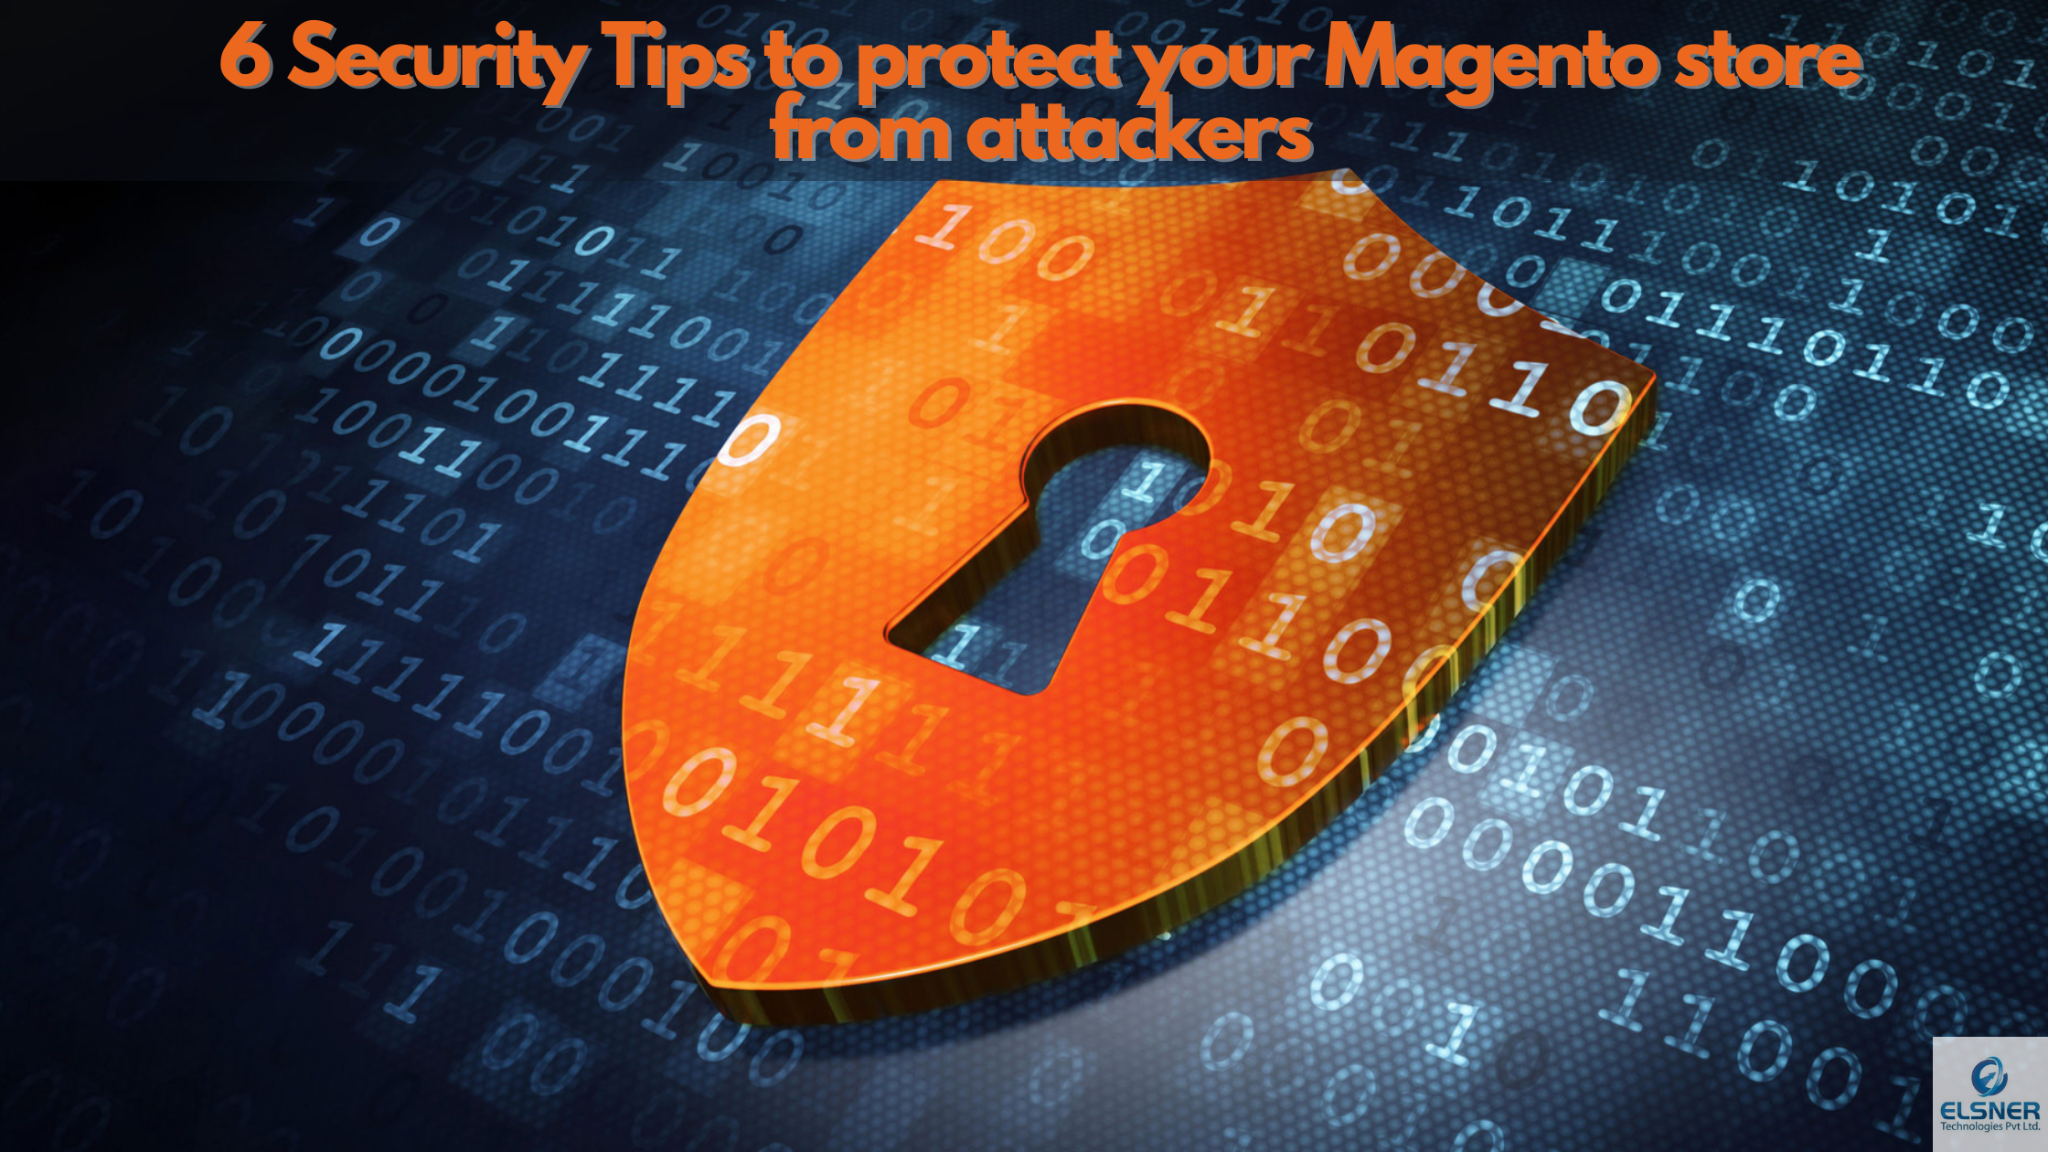 6 Security Tips to protect your Magento store from attackers